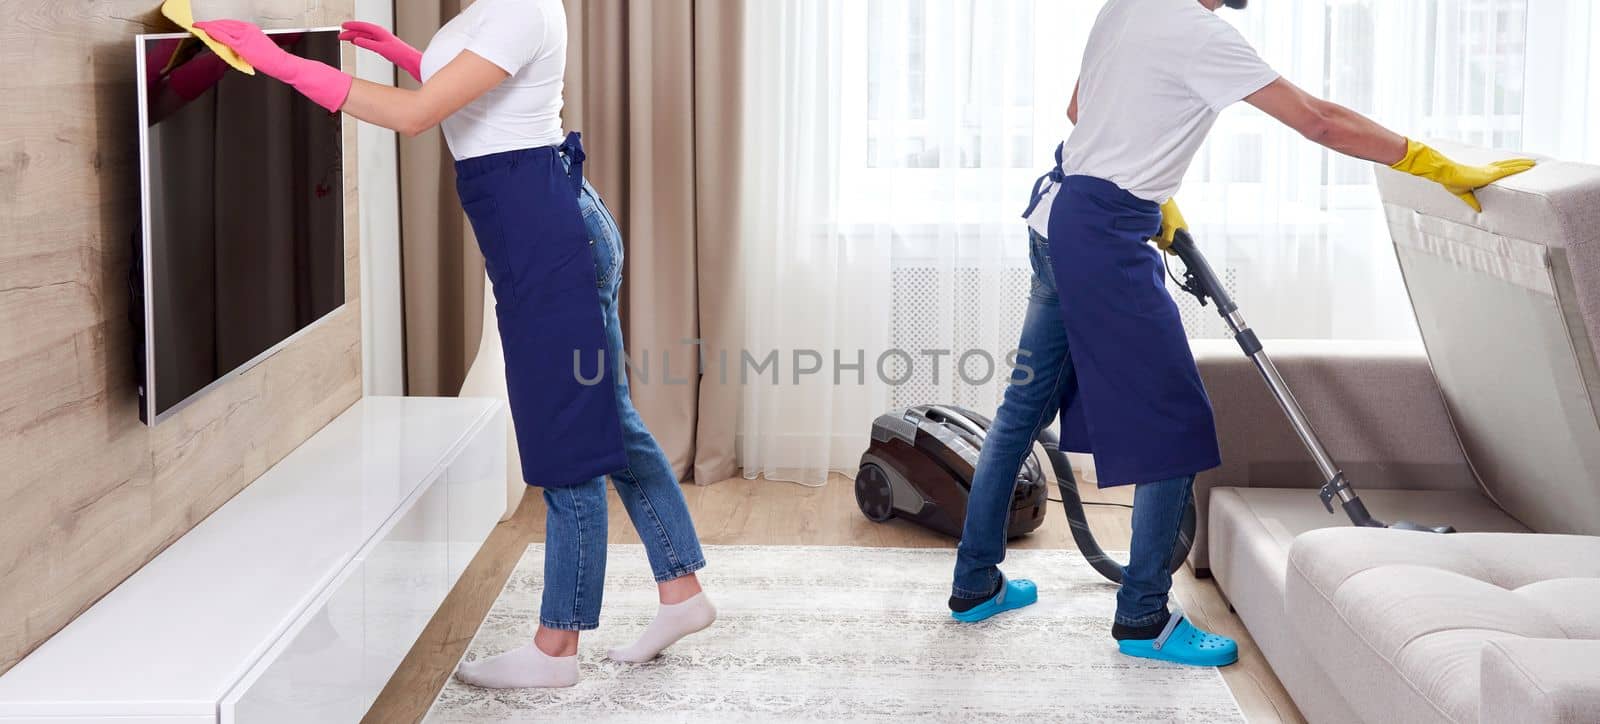 Professional cleaners in blue uniform washing floor and wiping dust from the furniture in the living room of the apartment. Cleaning service concept by Mariakray